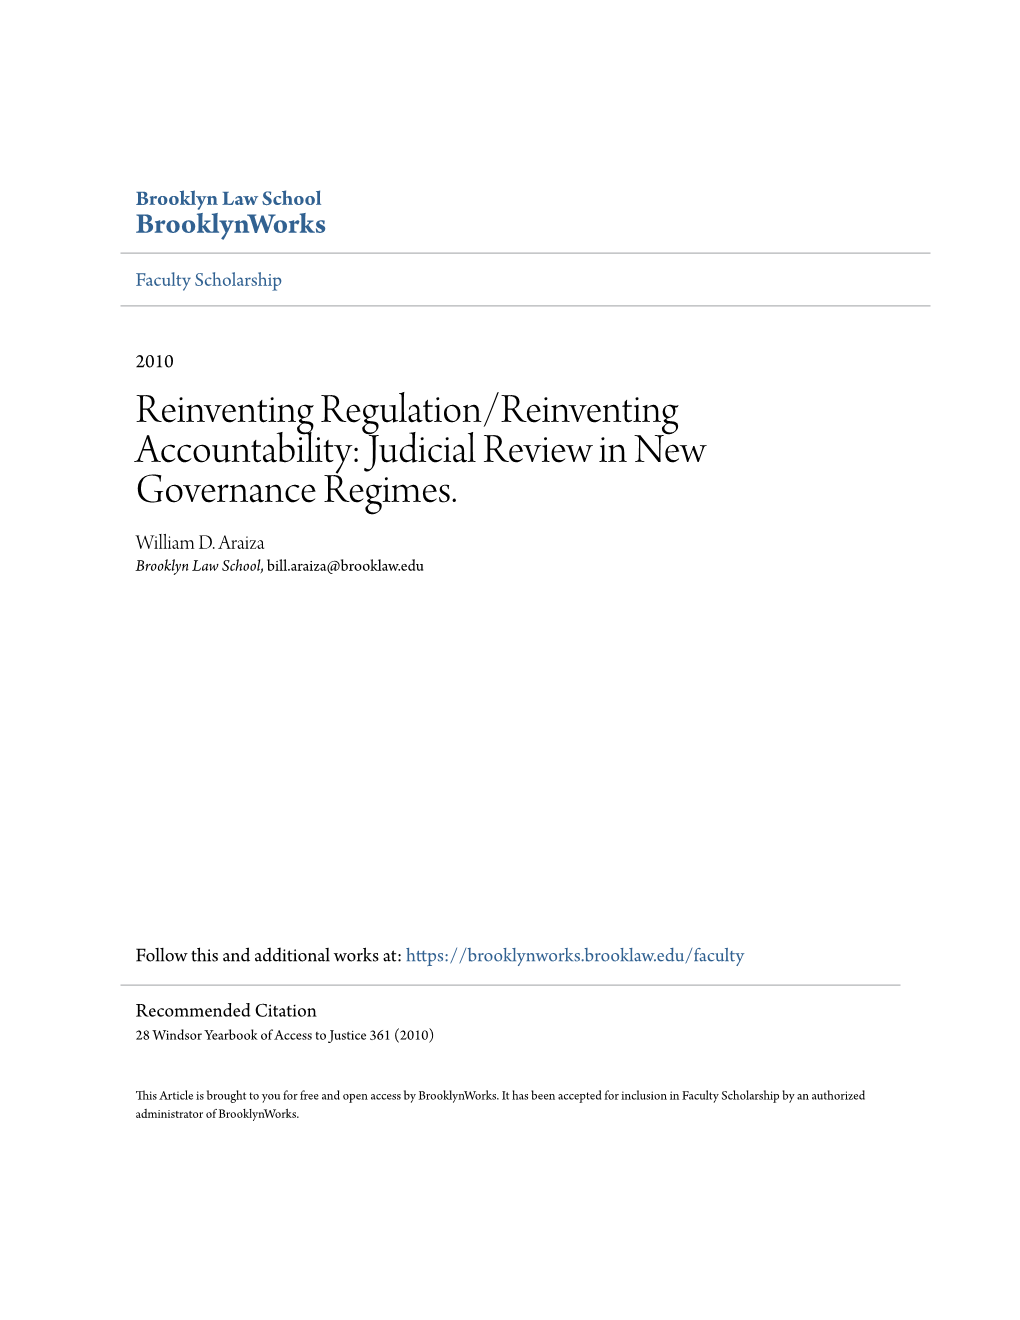 Judicial Review in New Governance Regimes. William D